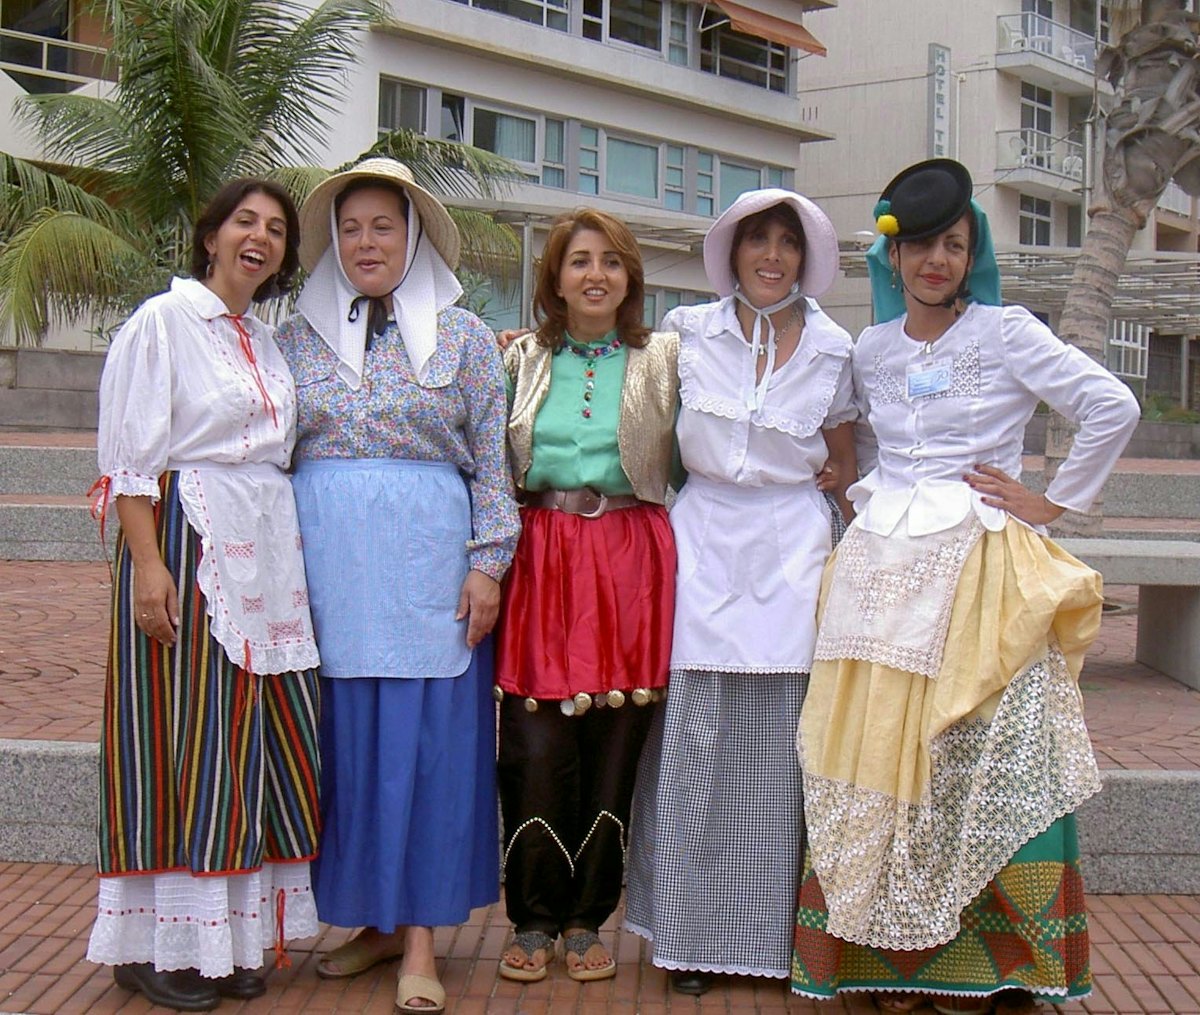 Colorful costumes were a feature of the jubilee in the Canary Islands.